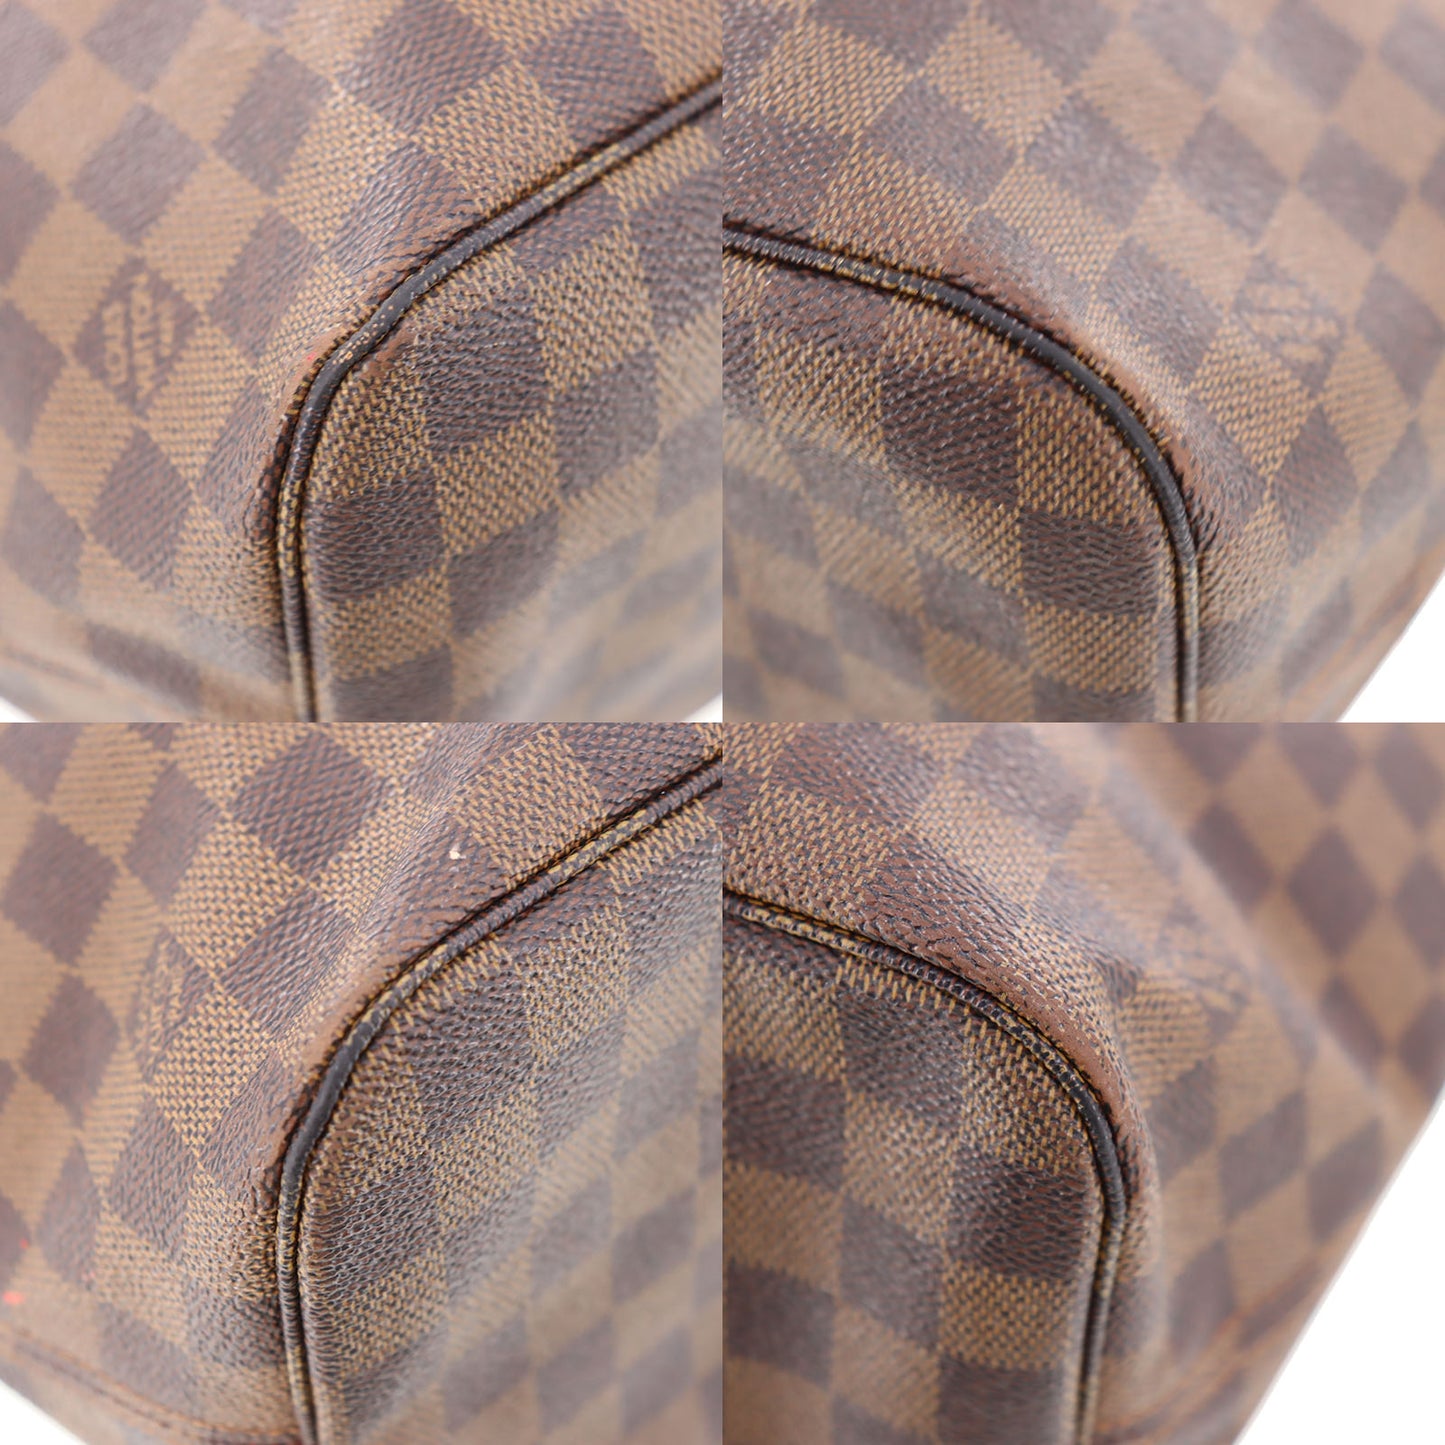 LOUIS VUITTON LOUIS VUITTON Neverfull MM Shoulder tote bag N41358 Damier  Ebene Used LV GHW N41358｜Product Code：2104101991514｜BRAND OFF Online Store